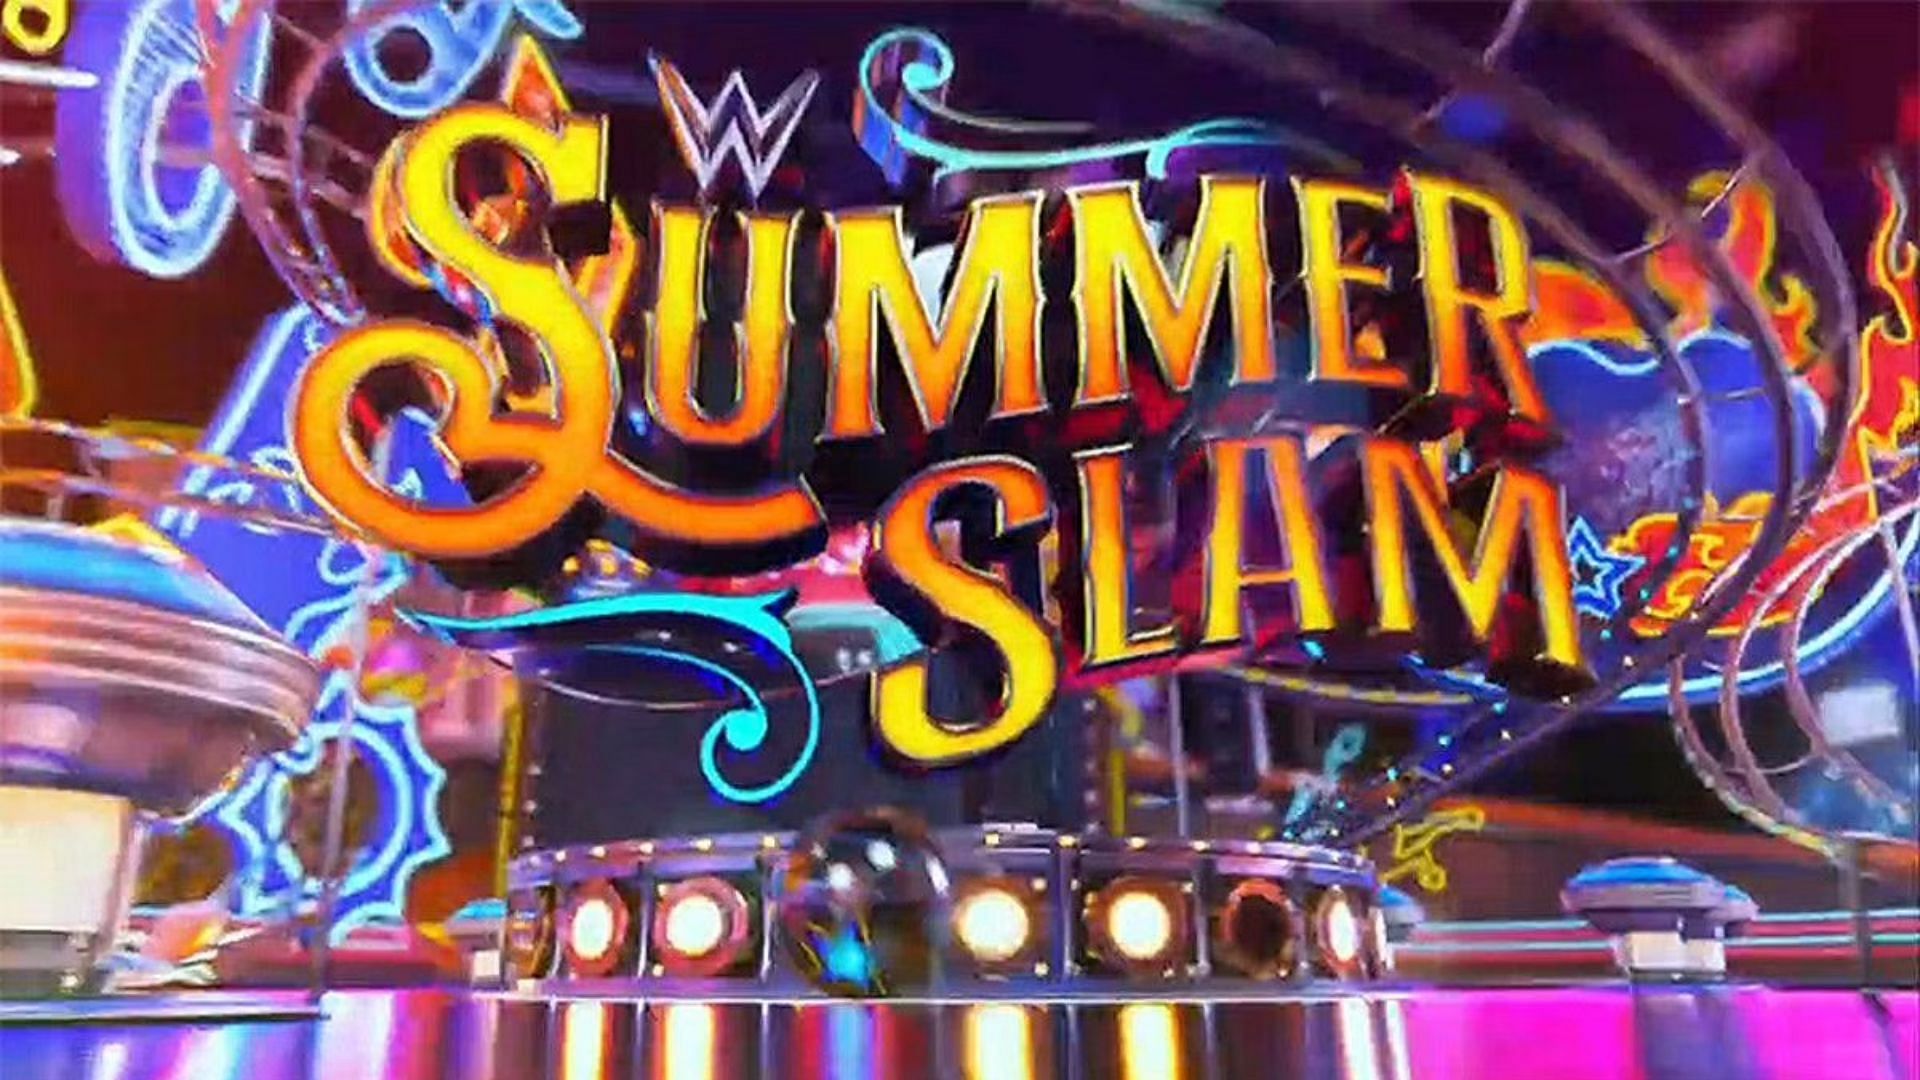 WWE dlivered an epic show at SummerSlam 2022